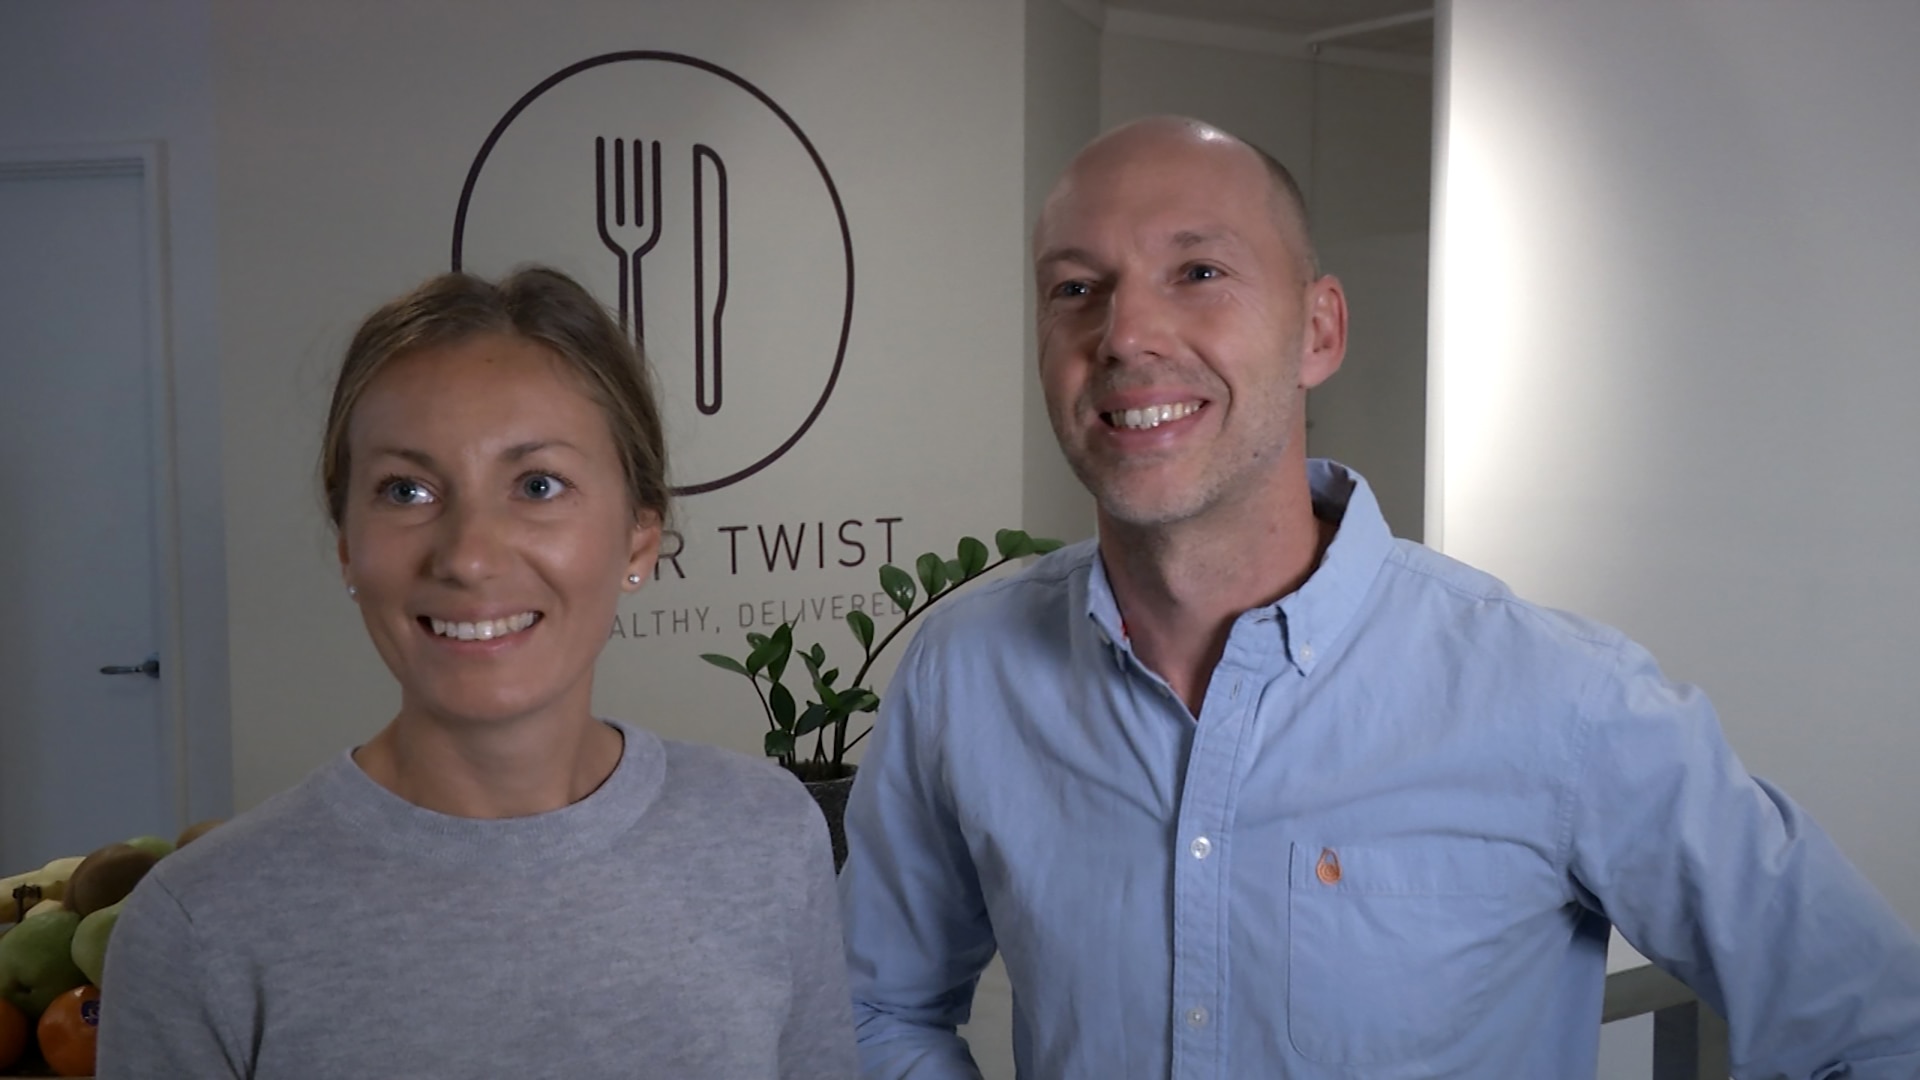 WA's Dinner Twist already reduce the use of plastics in their meal kits and work directly with a recycling company for any plastic that is needed.